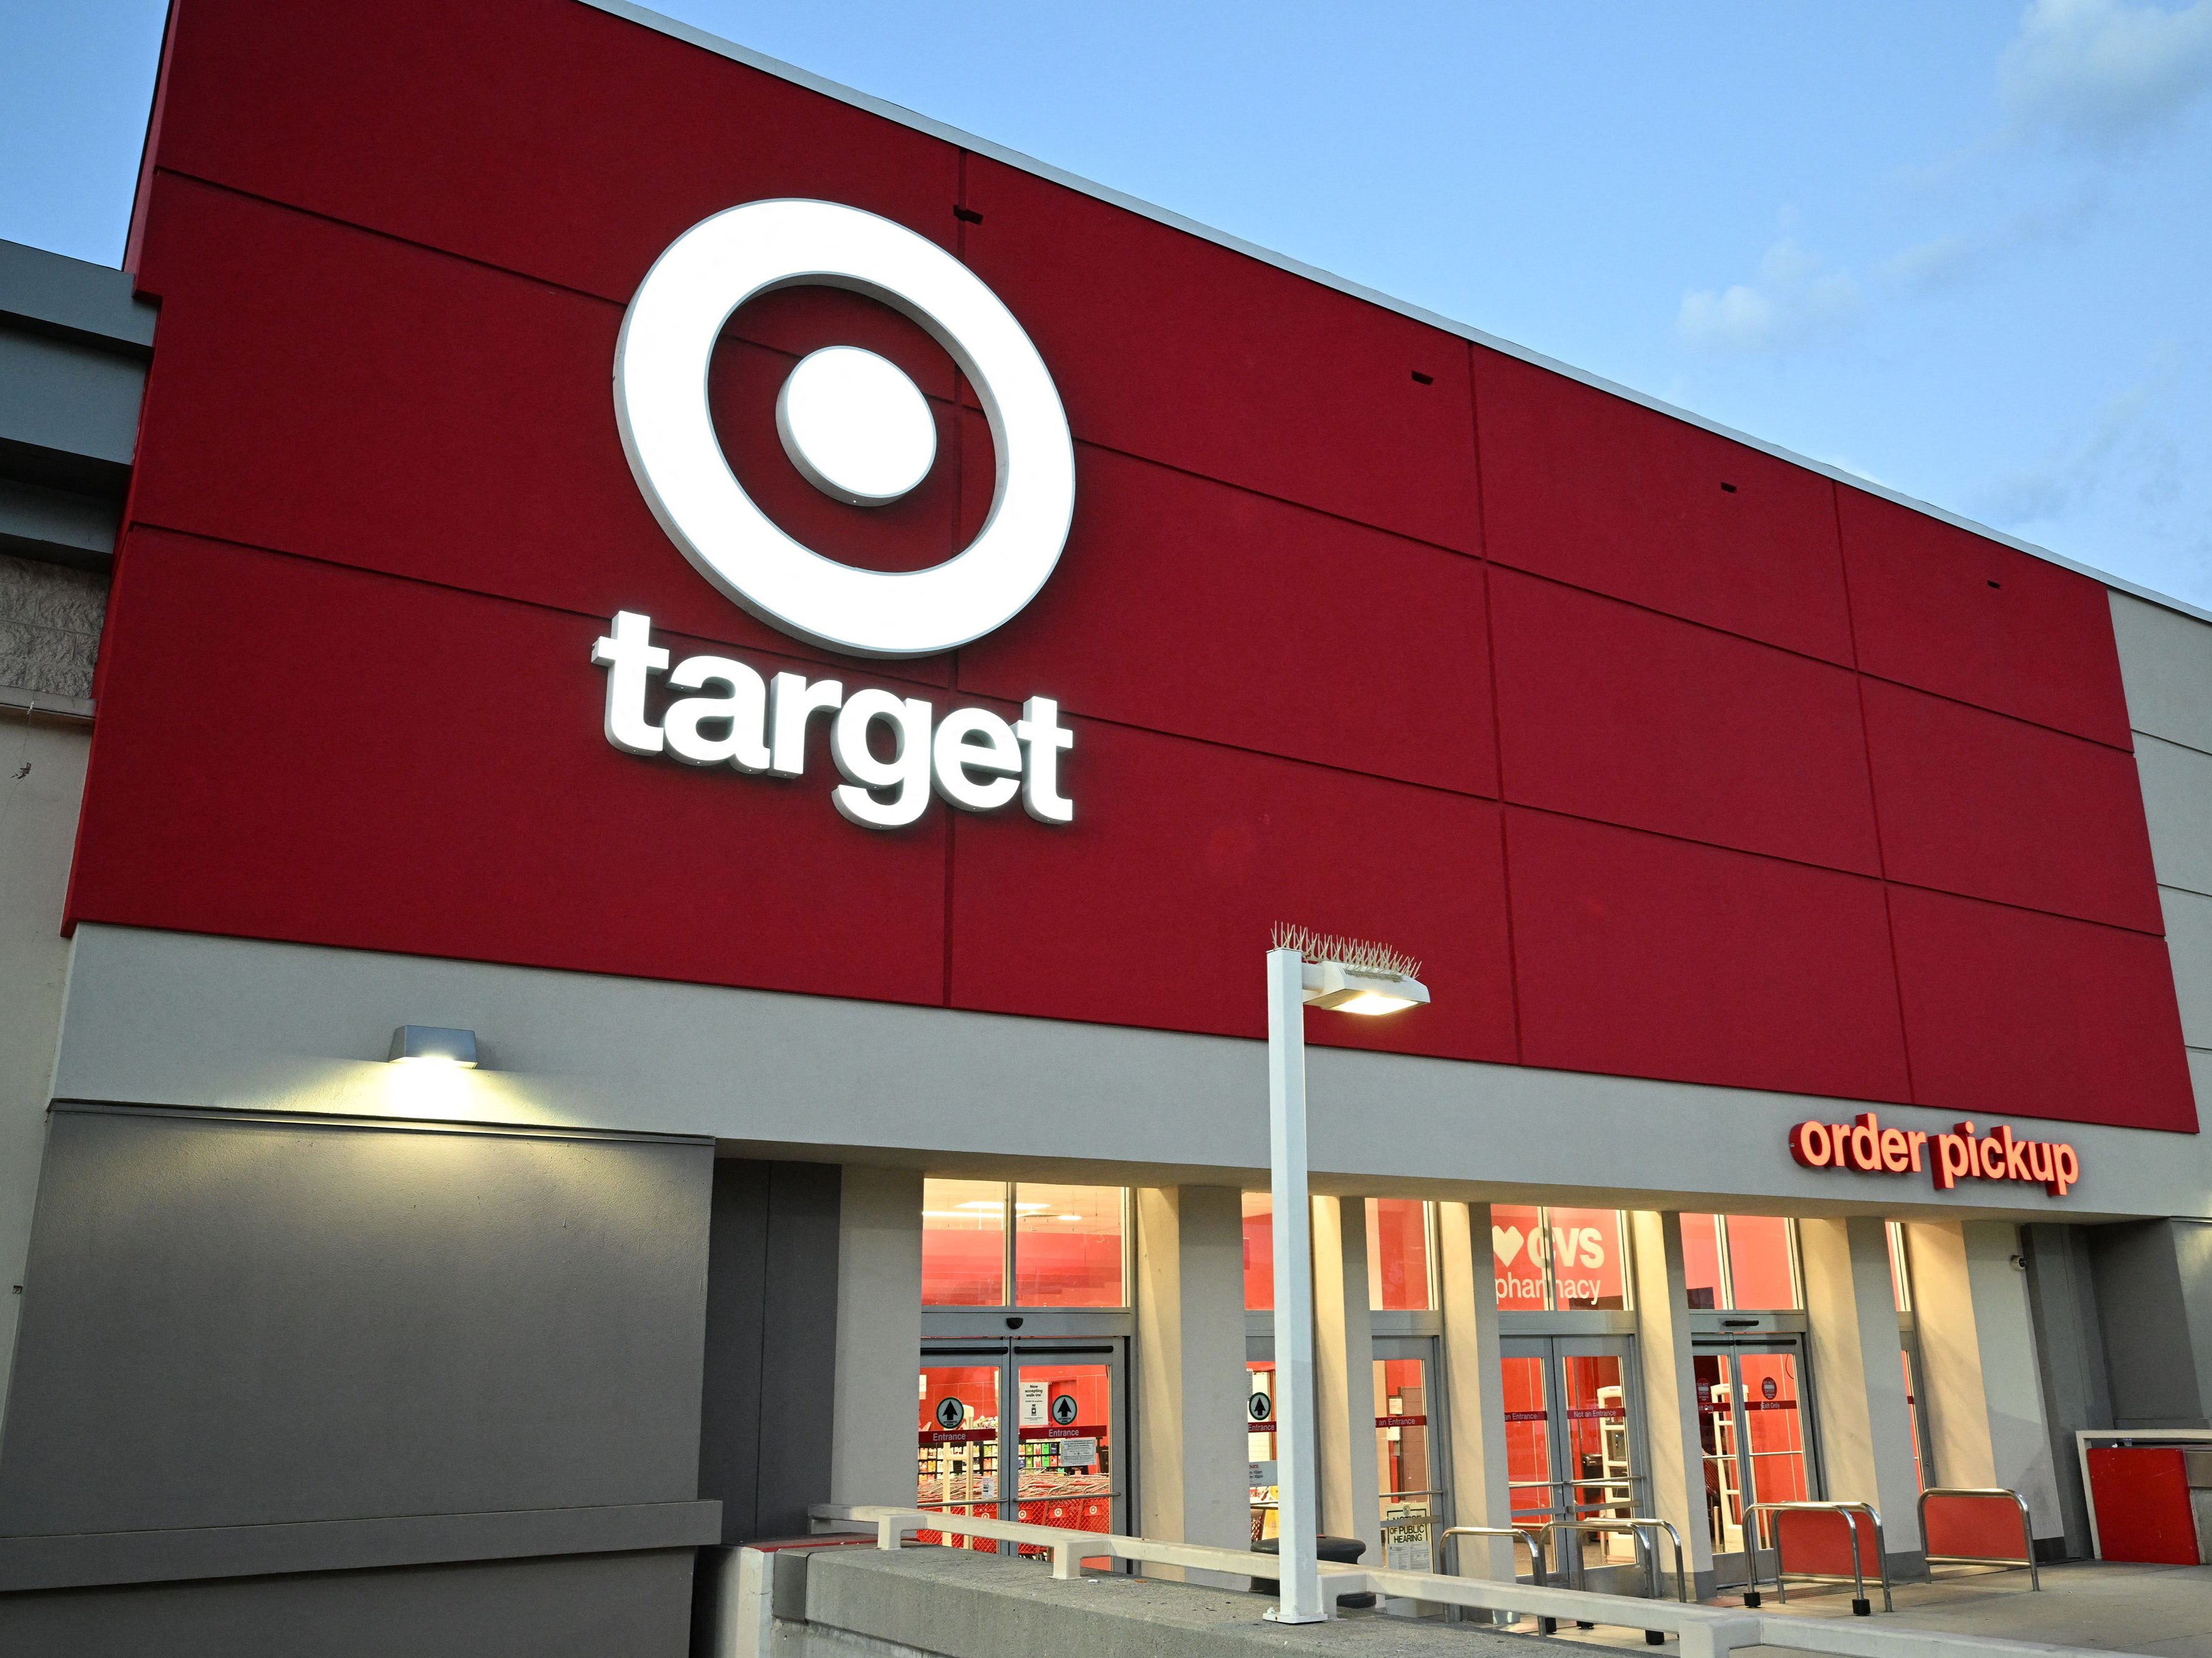 Should you apply for a Target RedCard?